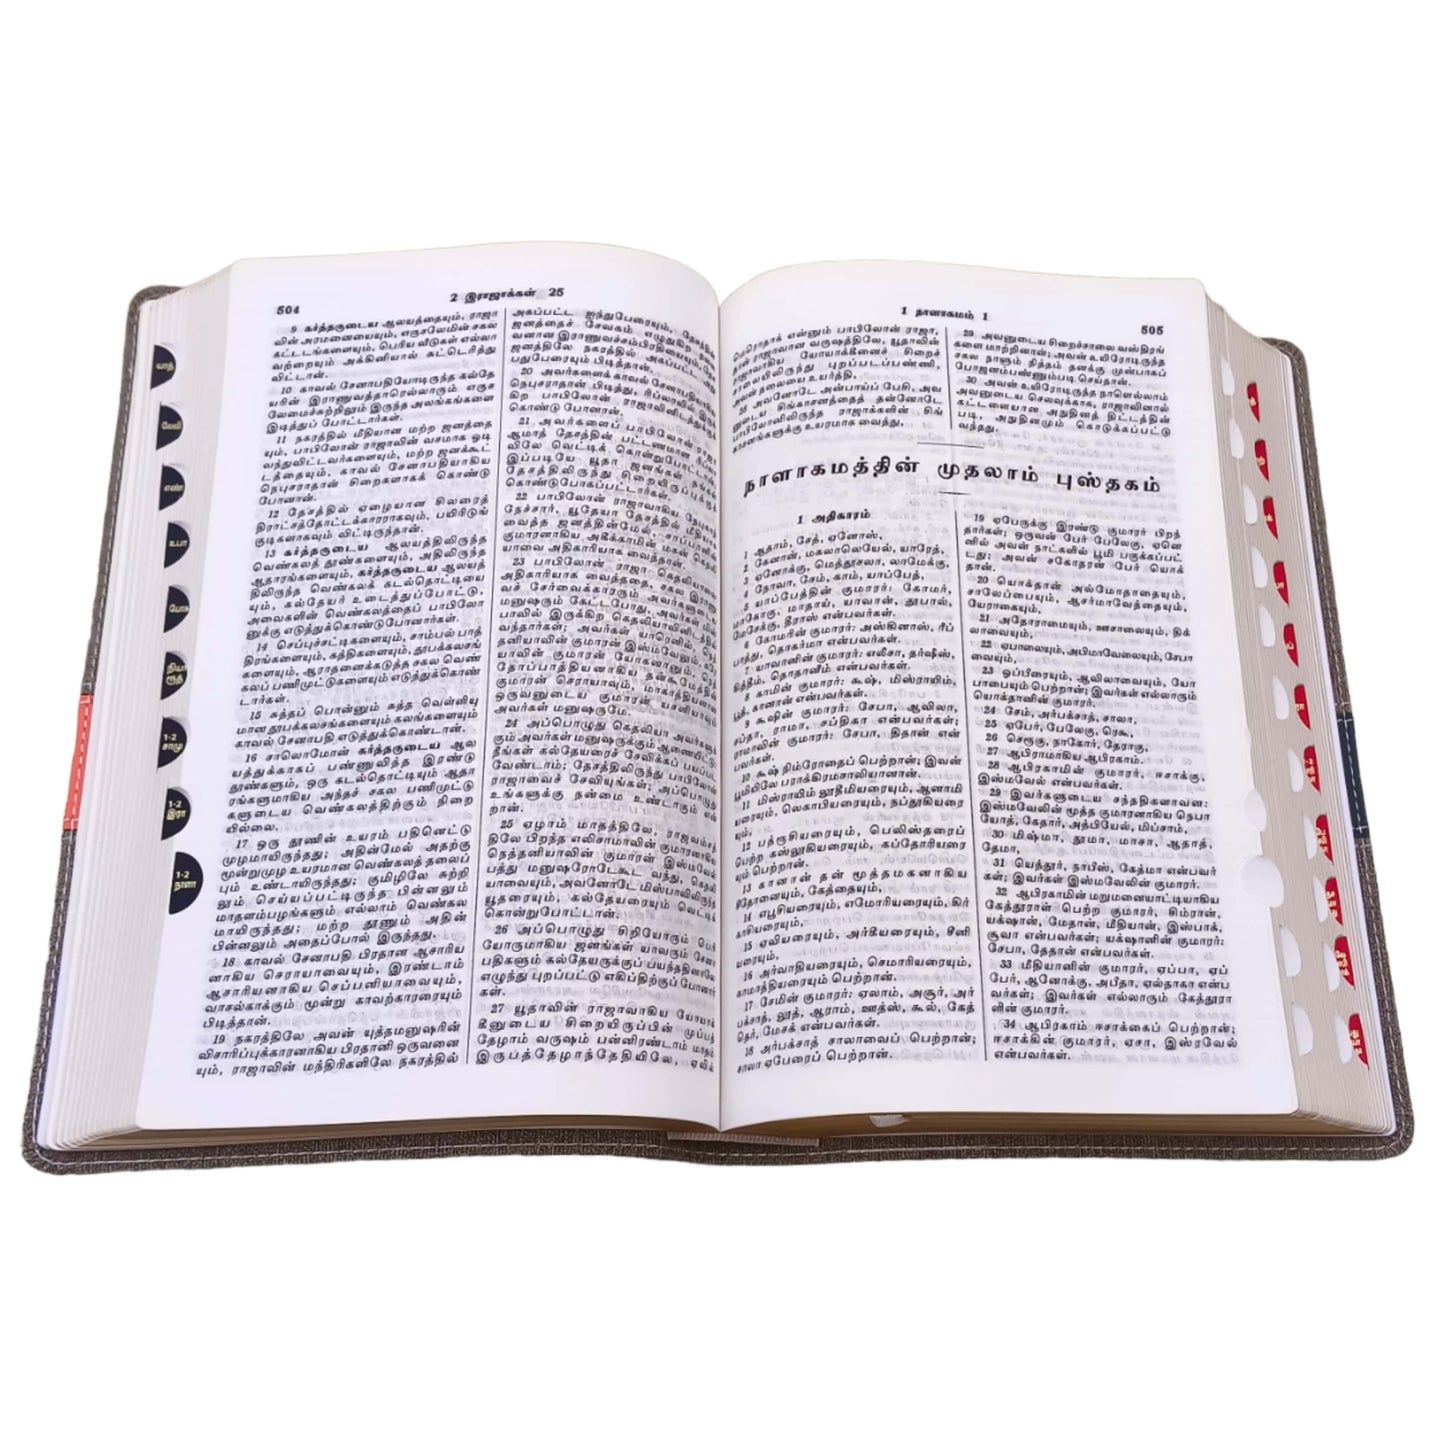 BSI Tamil Bible | With Thumb Index Edition | Duo Tone Glit Yapp Bible | New Edition